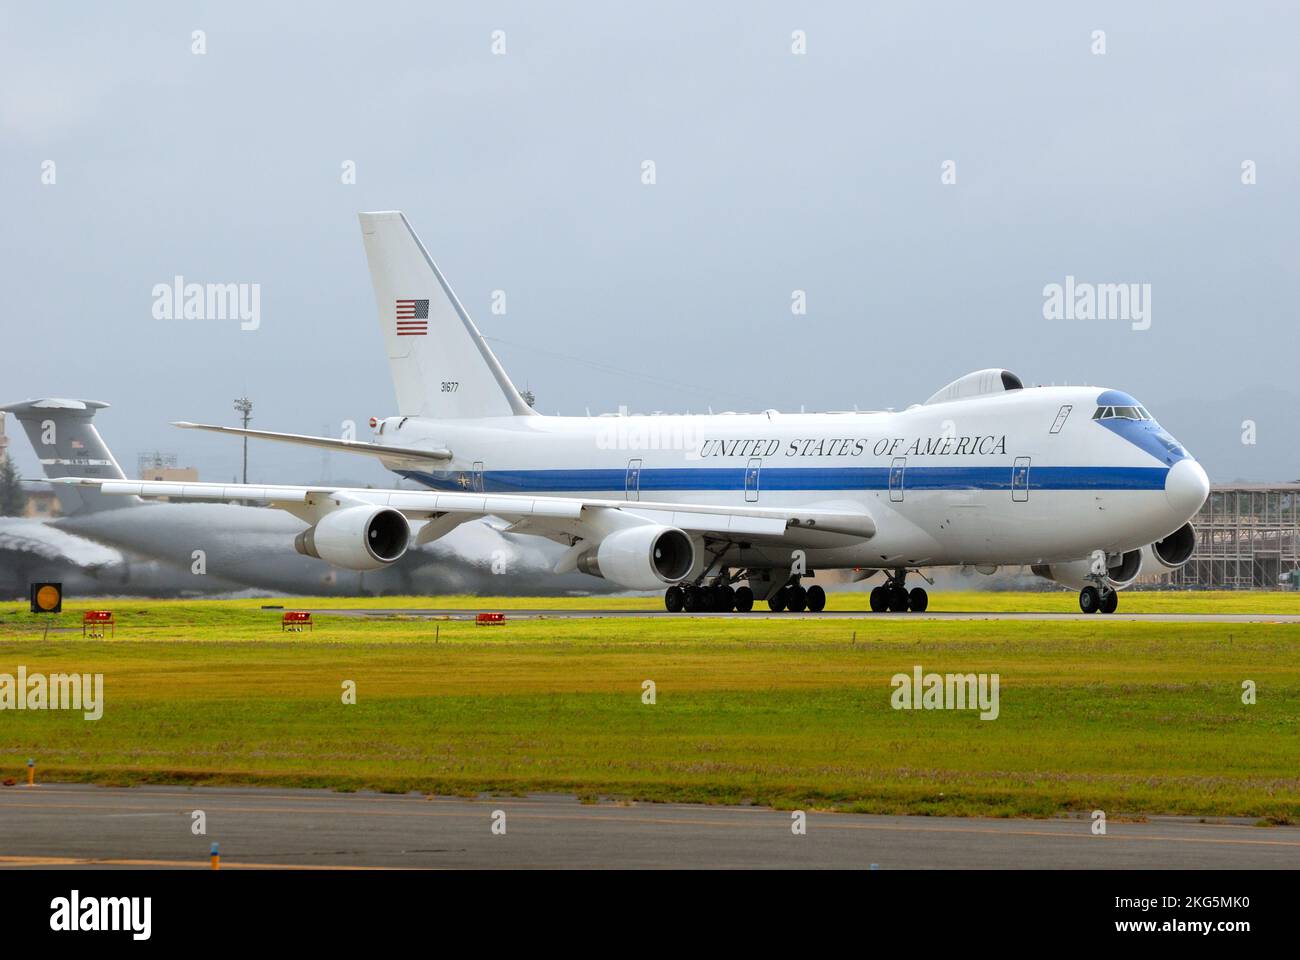 Tokyo, Japan - September 17, 2012: United States Air Force Boeing E-4B Nightwatch NEACP (National Emergency Airborne Command Post) aircraft. Stock Photo